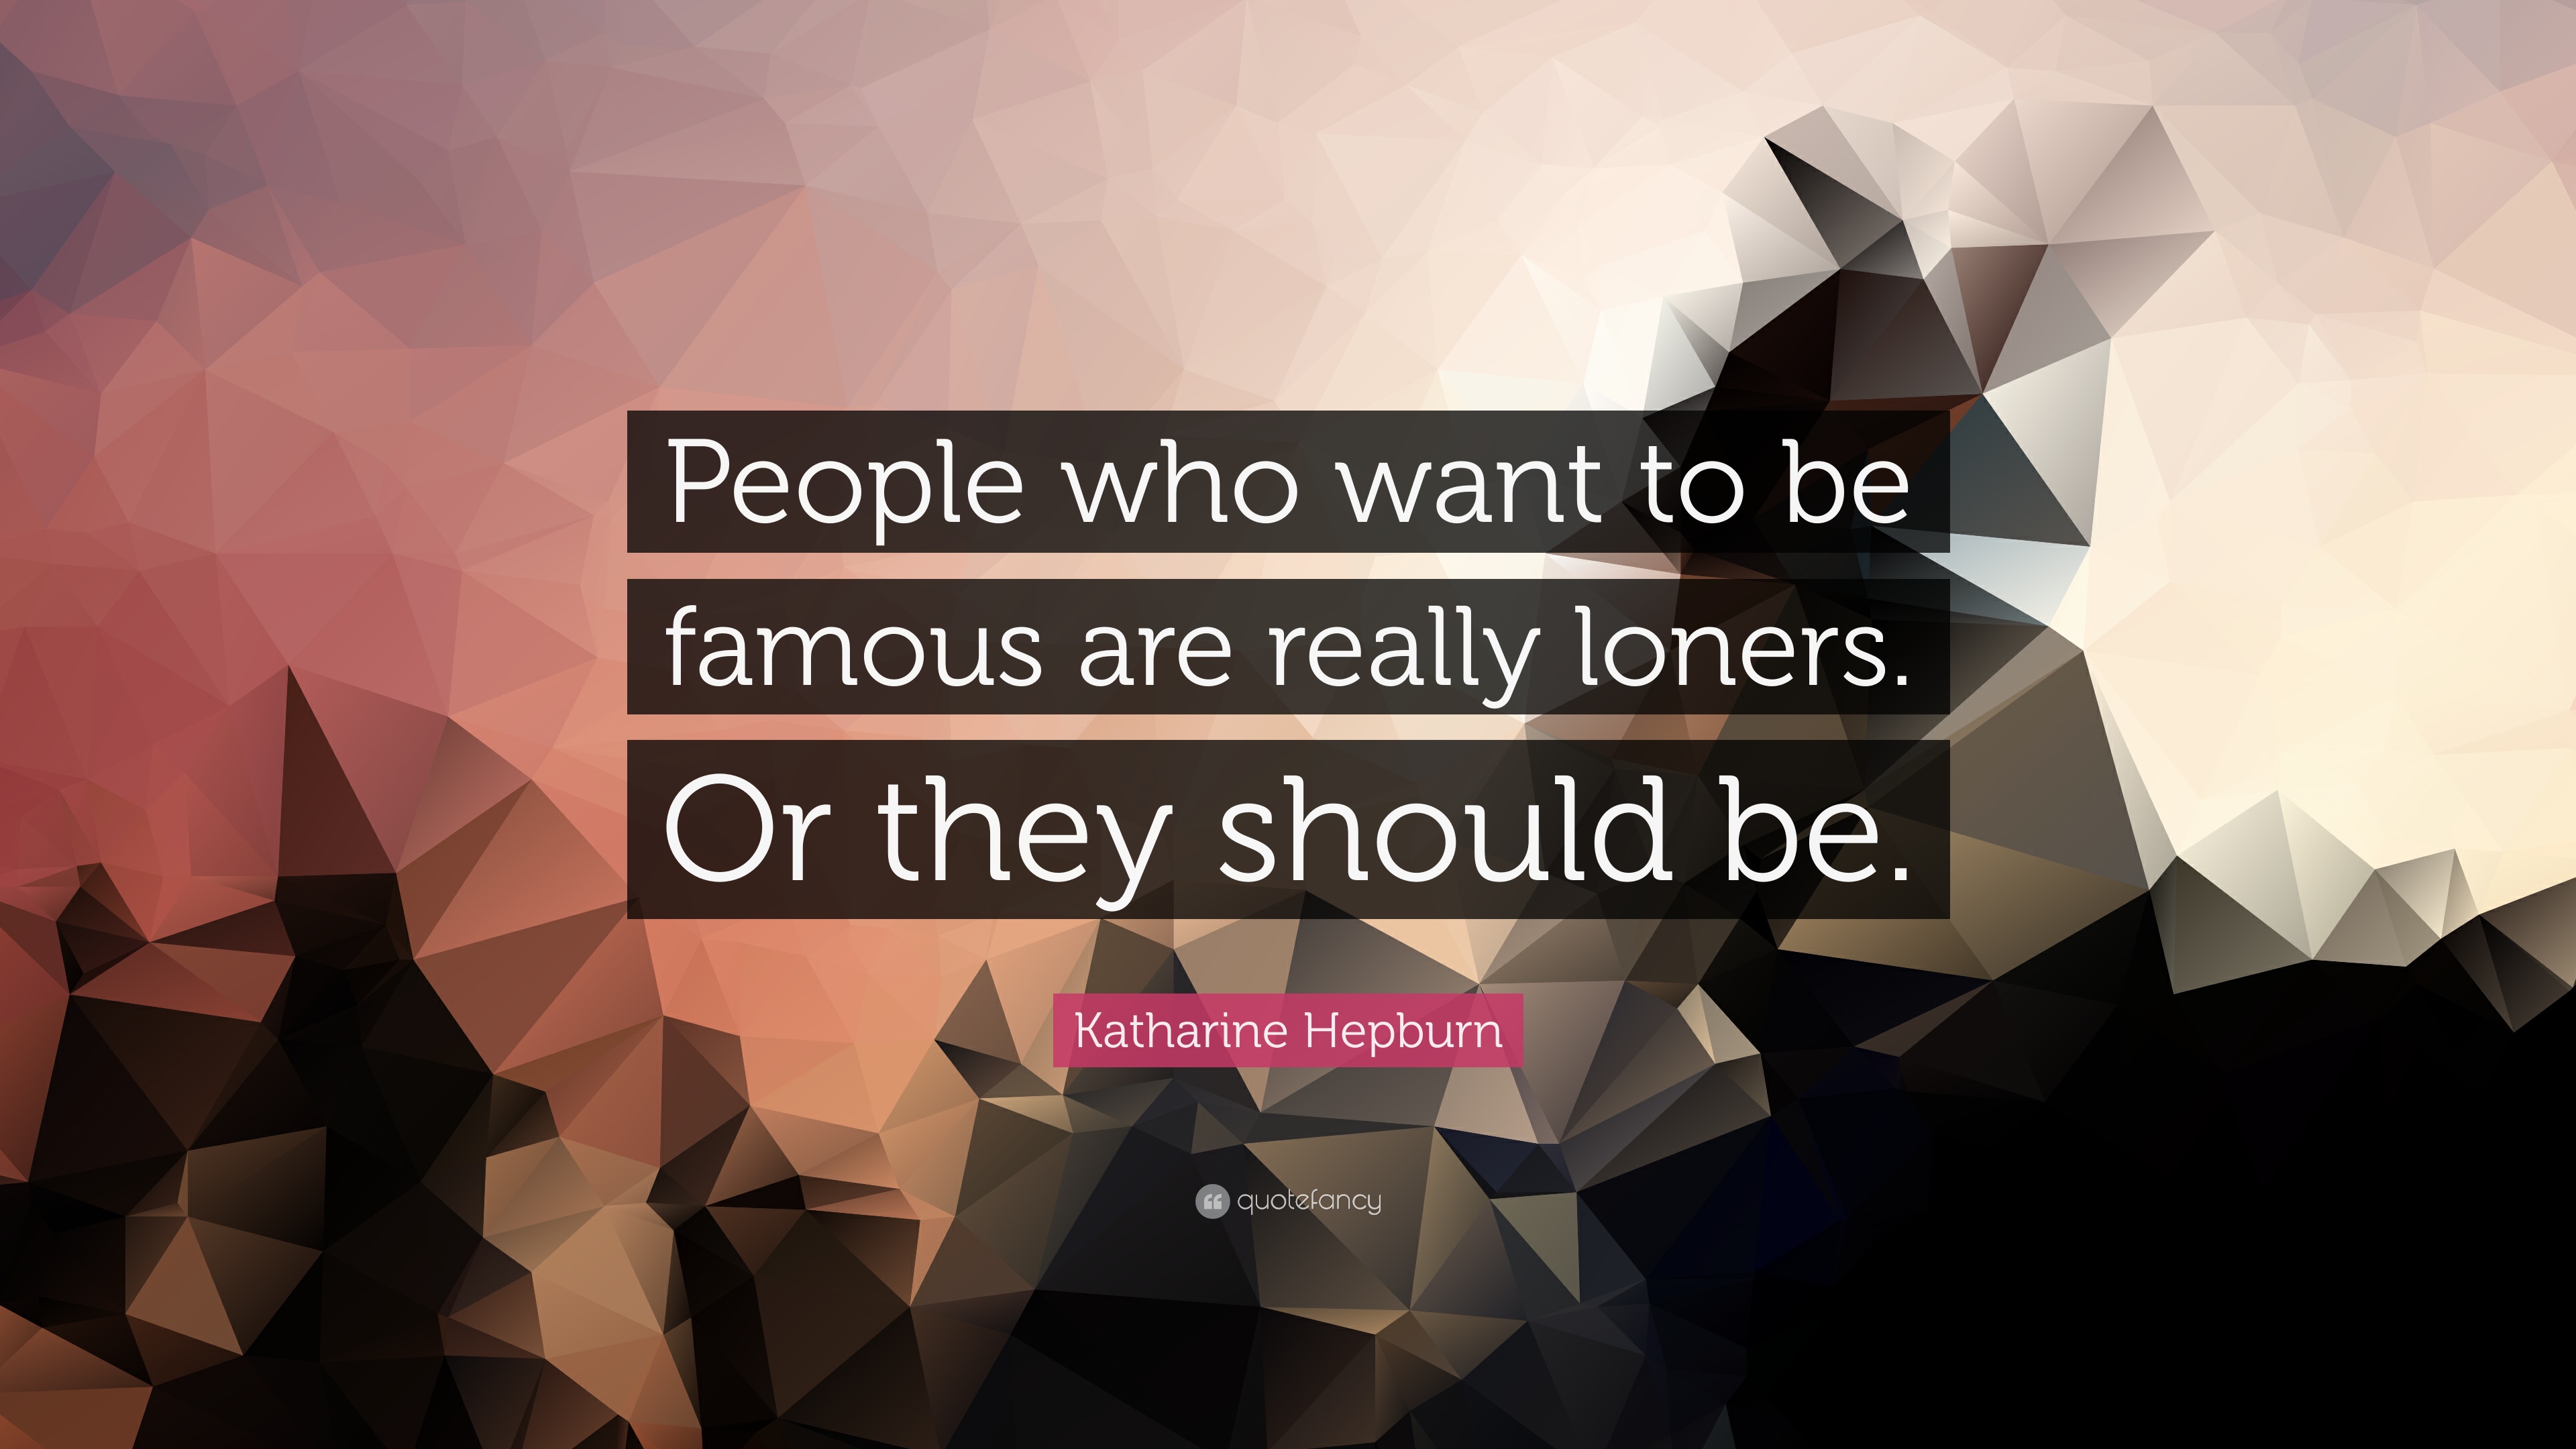 Katharine Hepburn Quote: “People who want to be famous are really ...